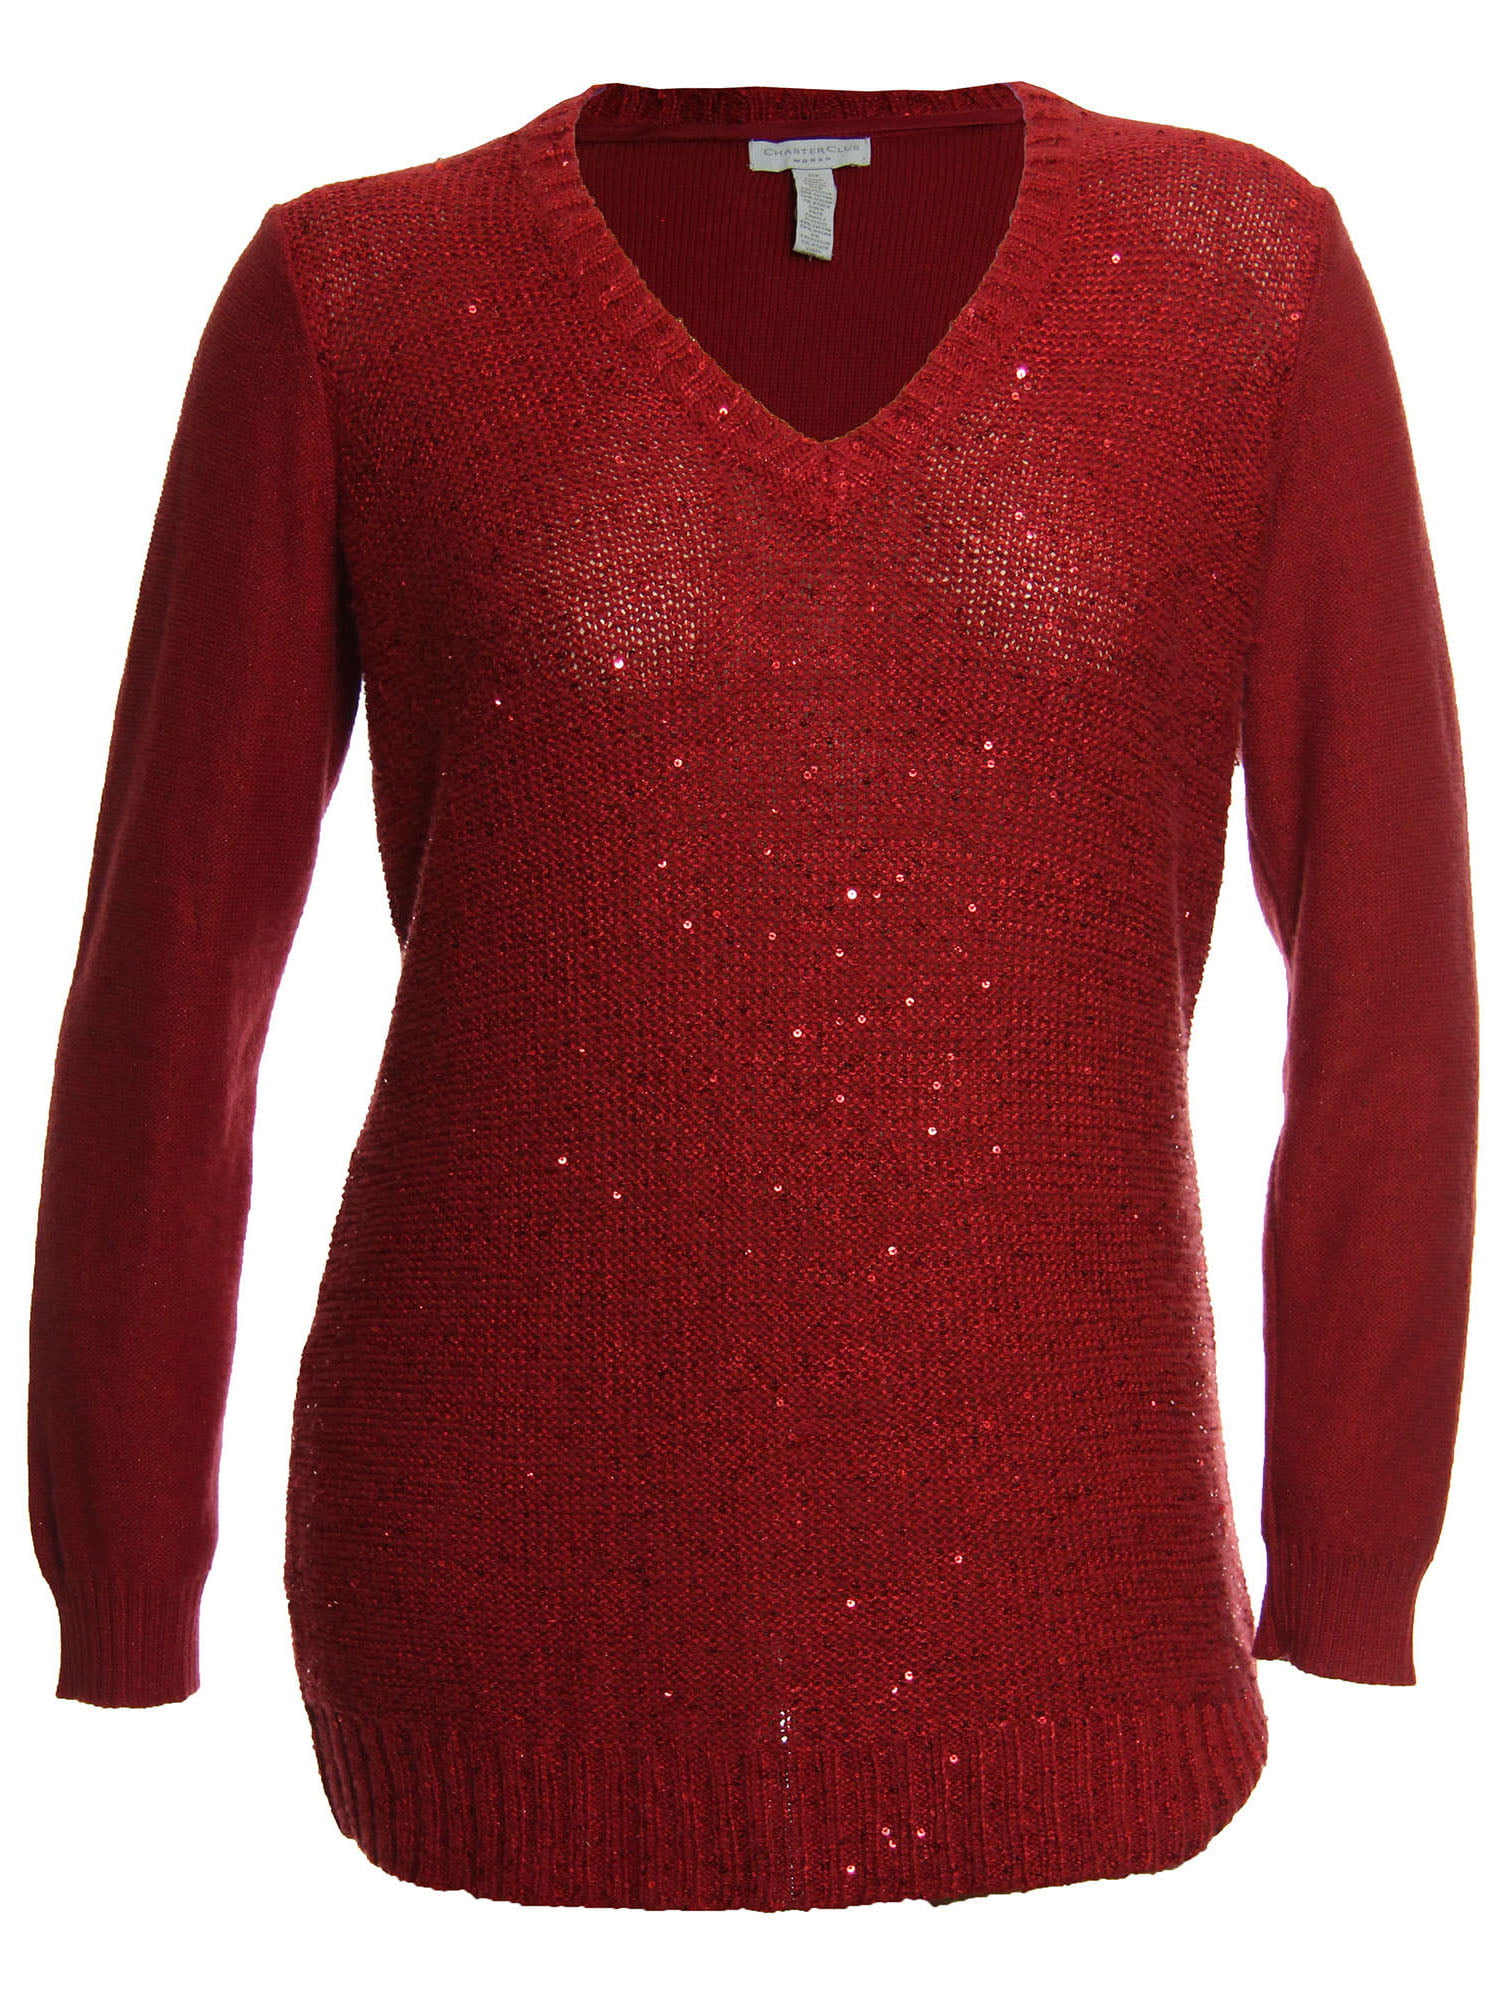 Charter Club Womens Plus SIze V-Neck Long Sleeve Sweater 0X Red